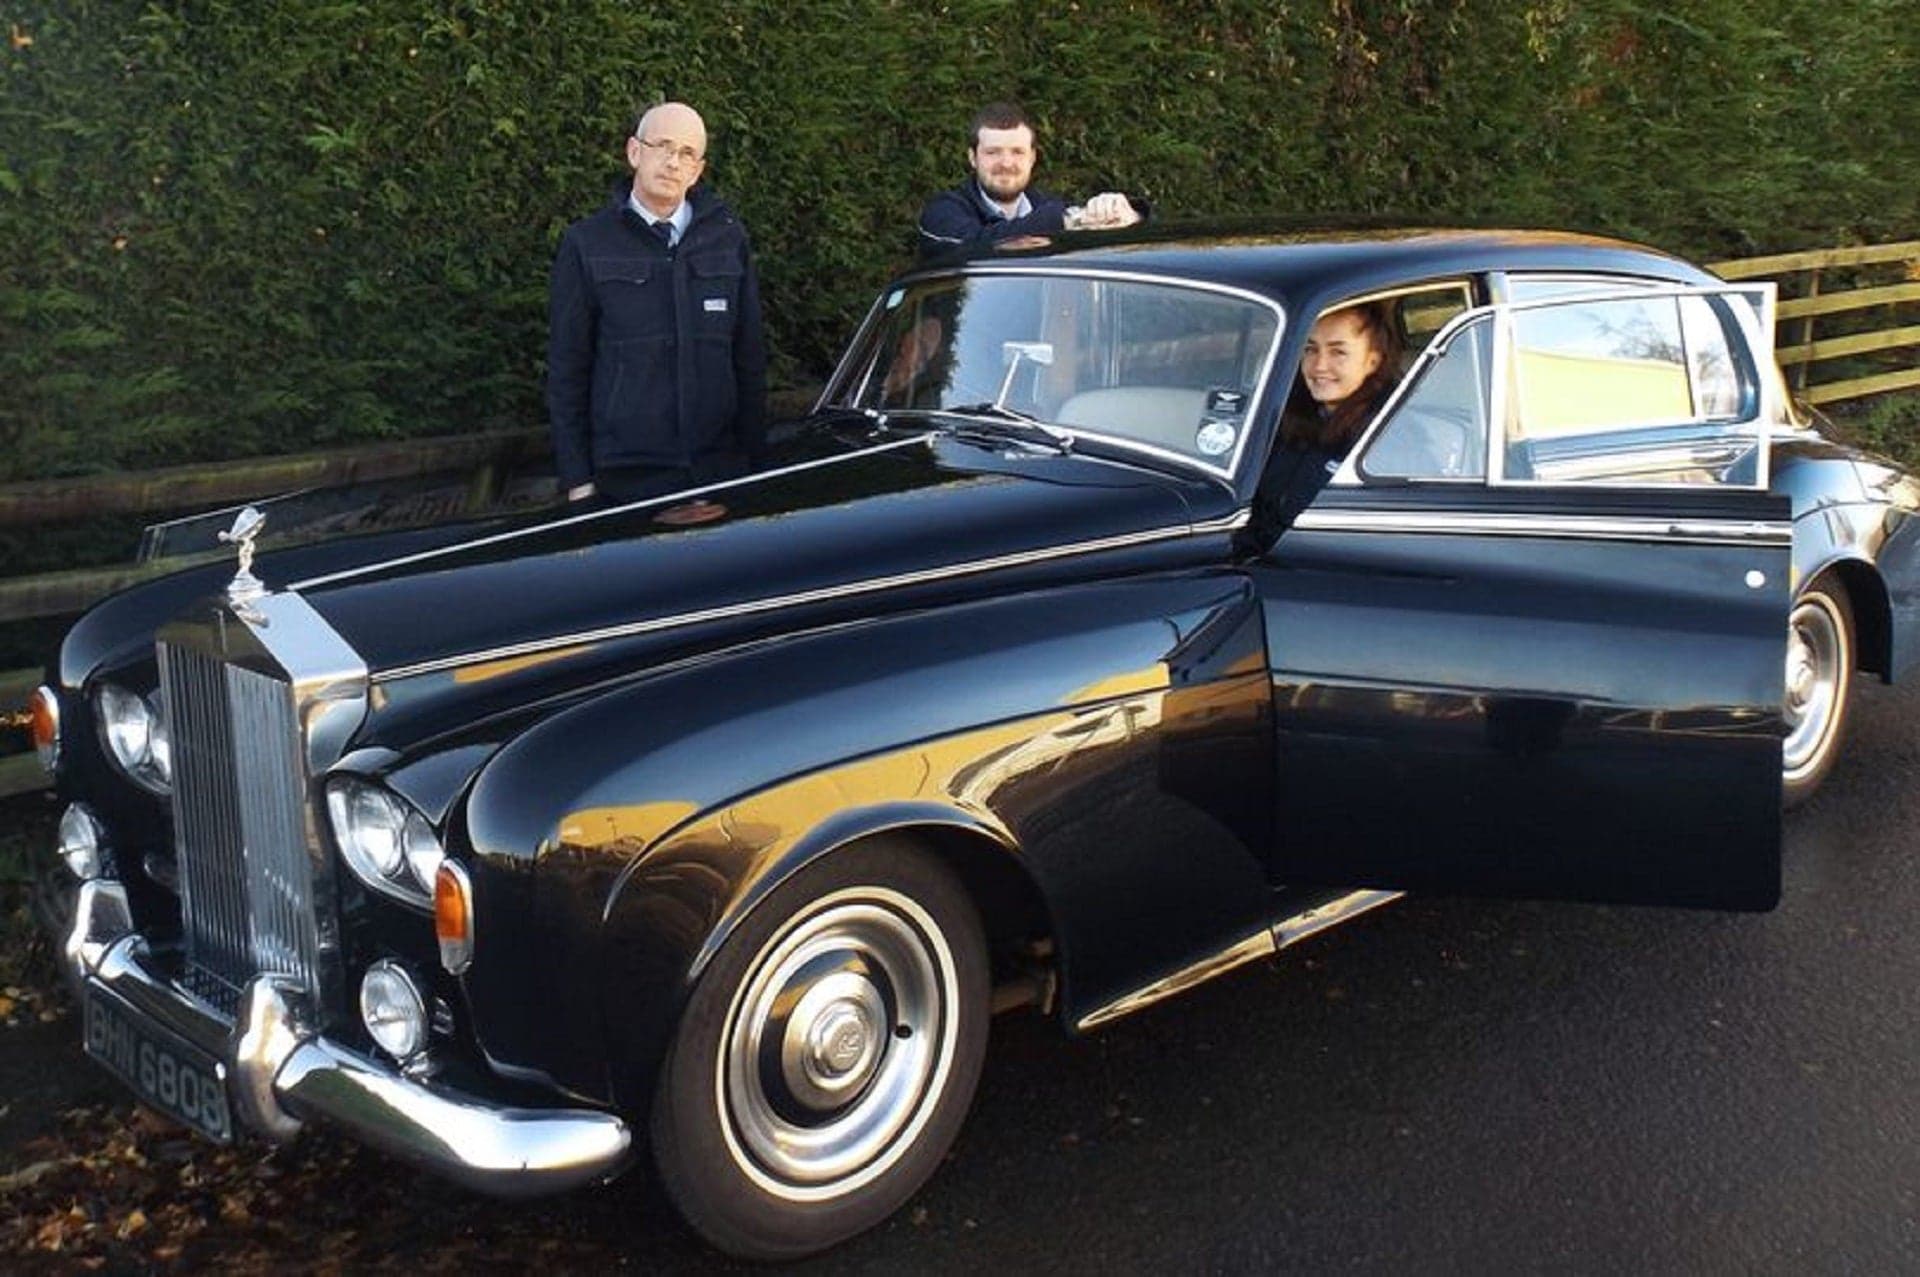 You Can Buy the Queen of England’s Rolls Royce This Weekend